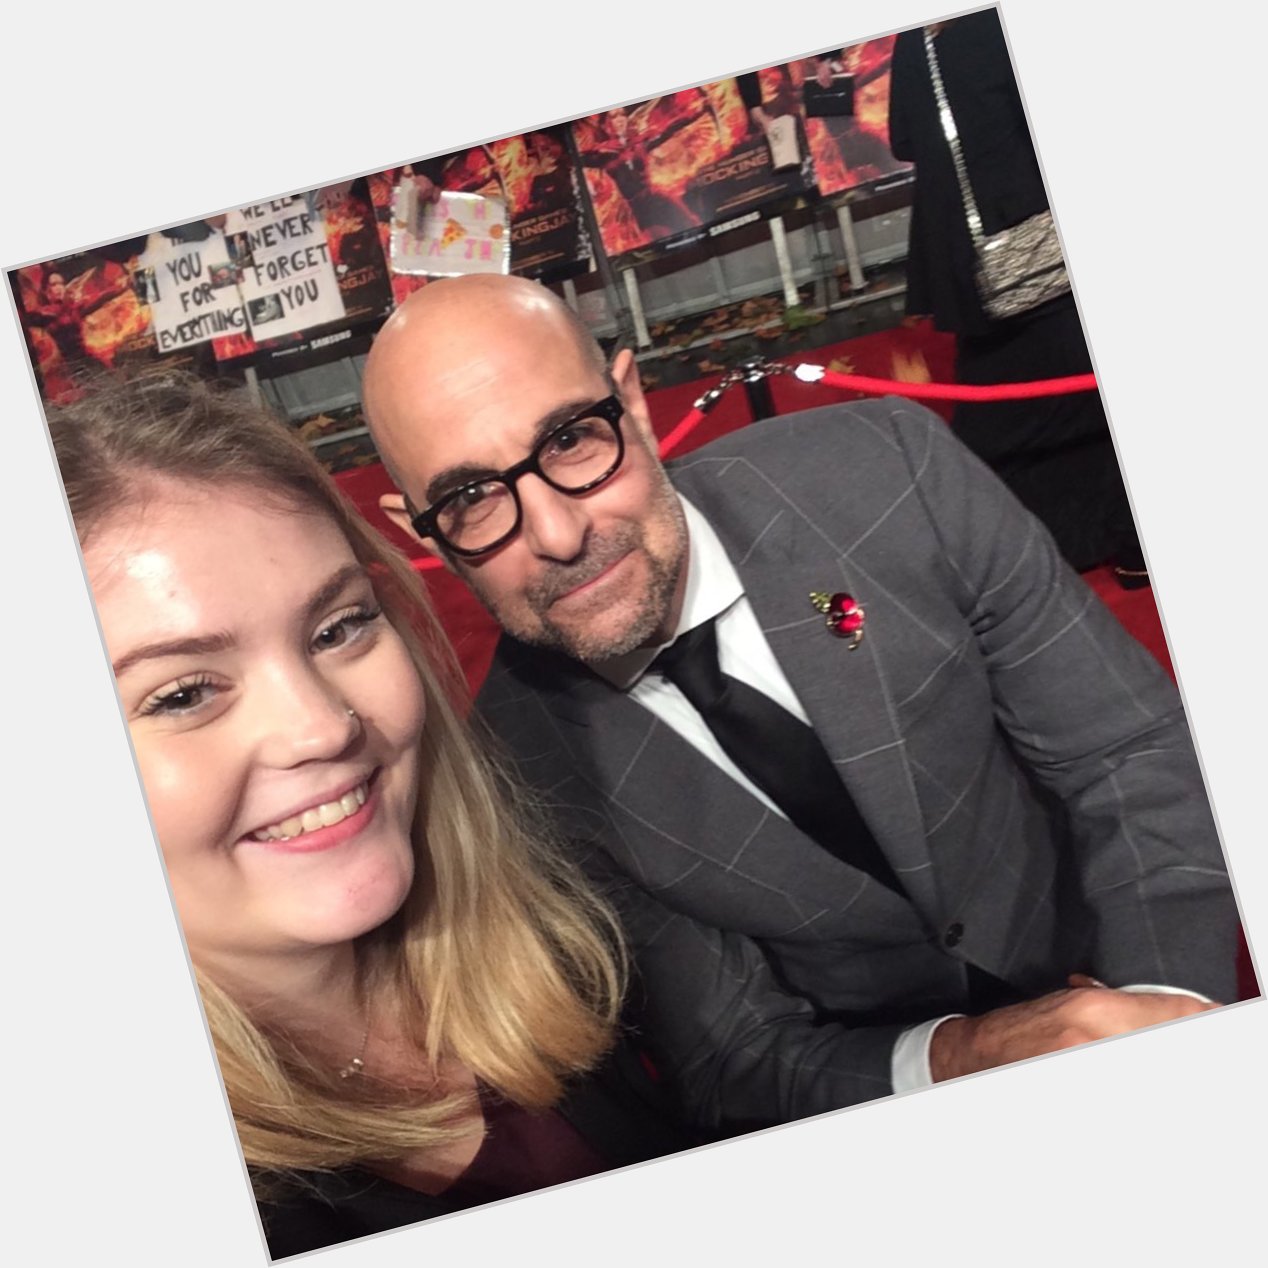 Happy birthday Stanley Tucci! he recognised me from outside when I was inside the cinema and omg tysm  